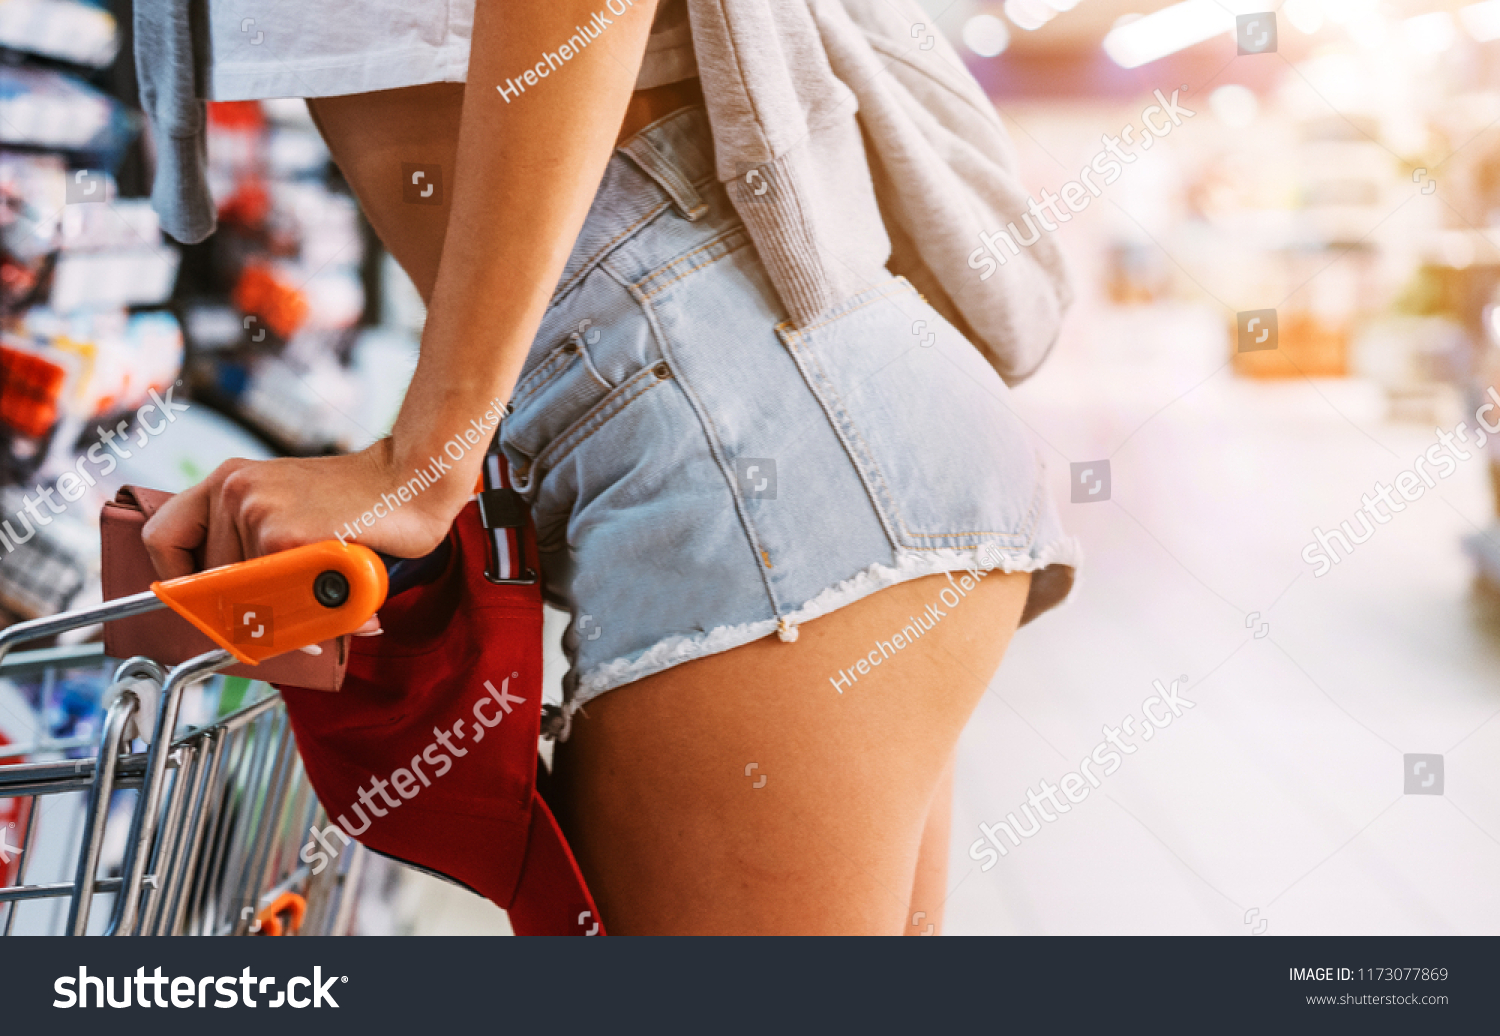 Hot girls at mall Hot Girl Legs Grocery Store Stock Photo Edit Now 1173077869